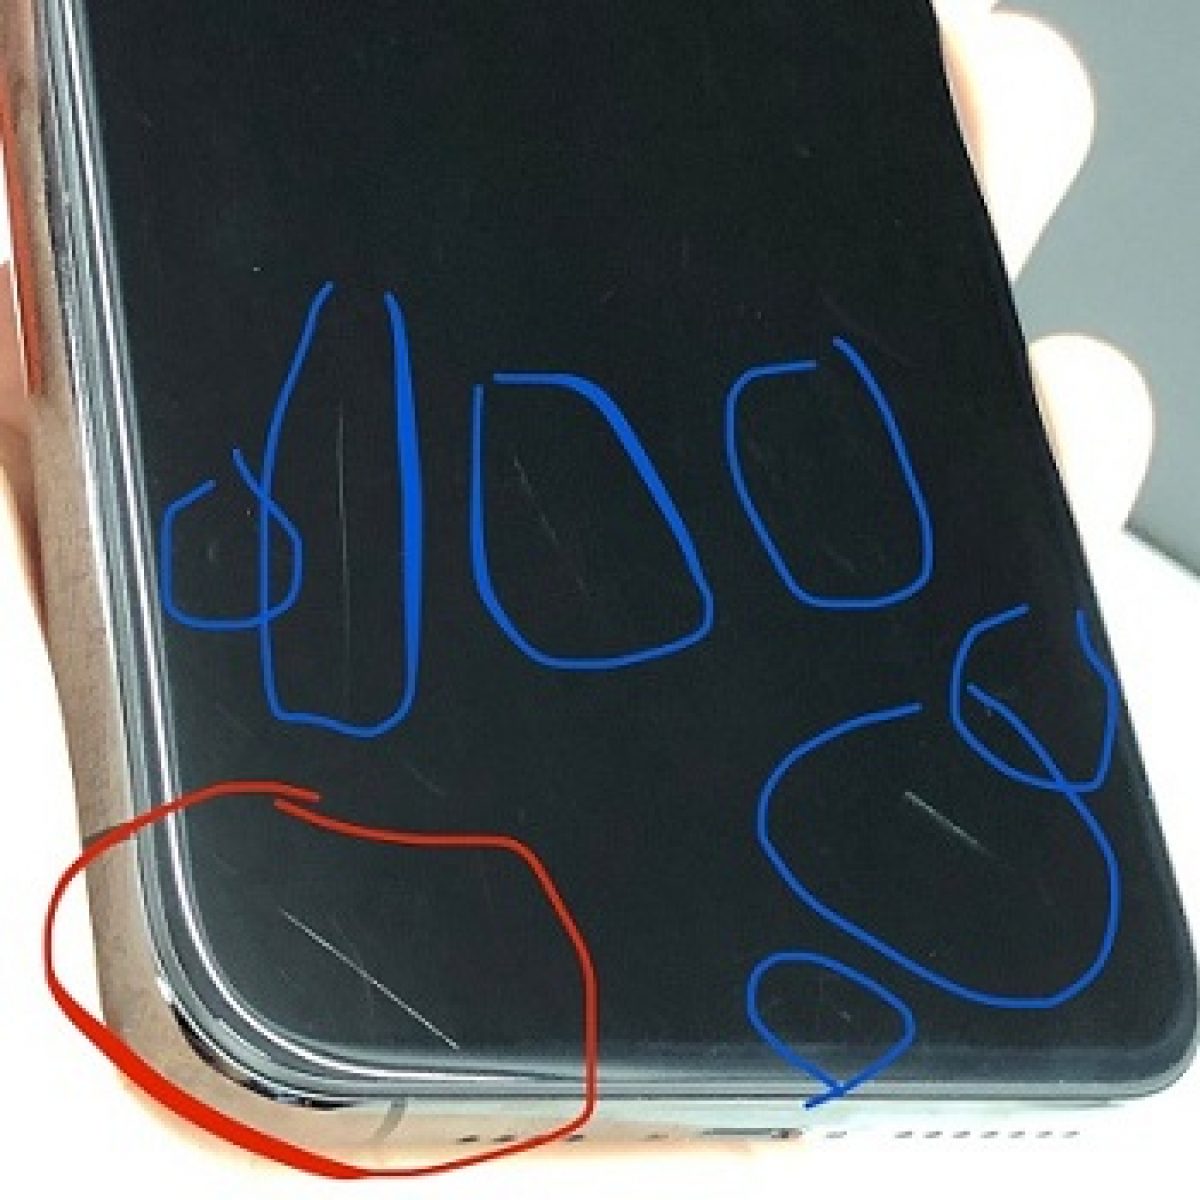 How to Remove Scratches from Your Phone Screen 